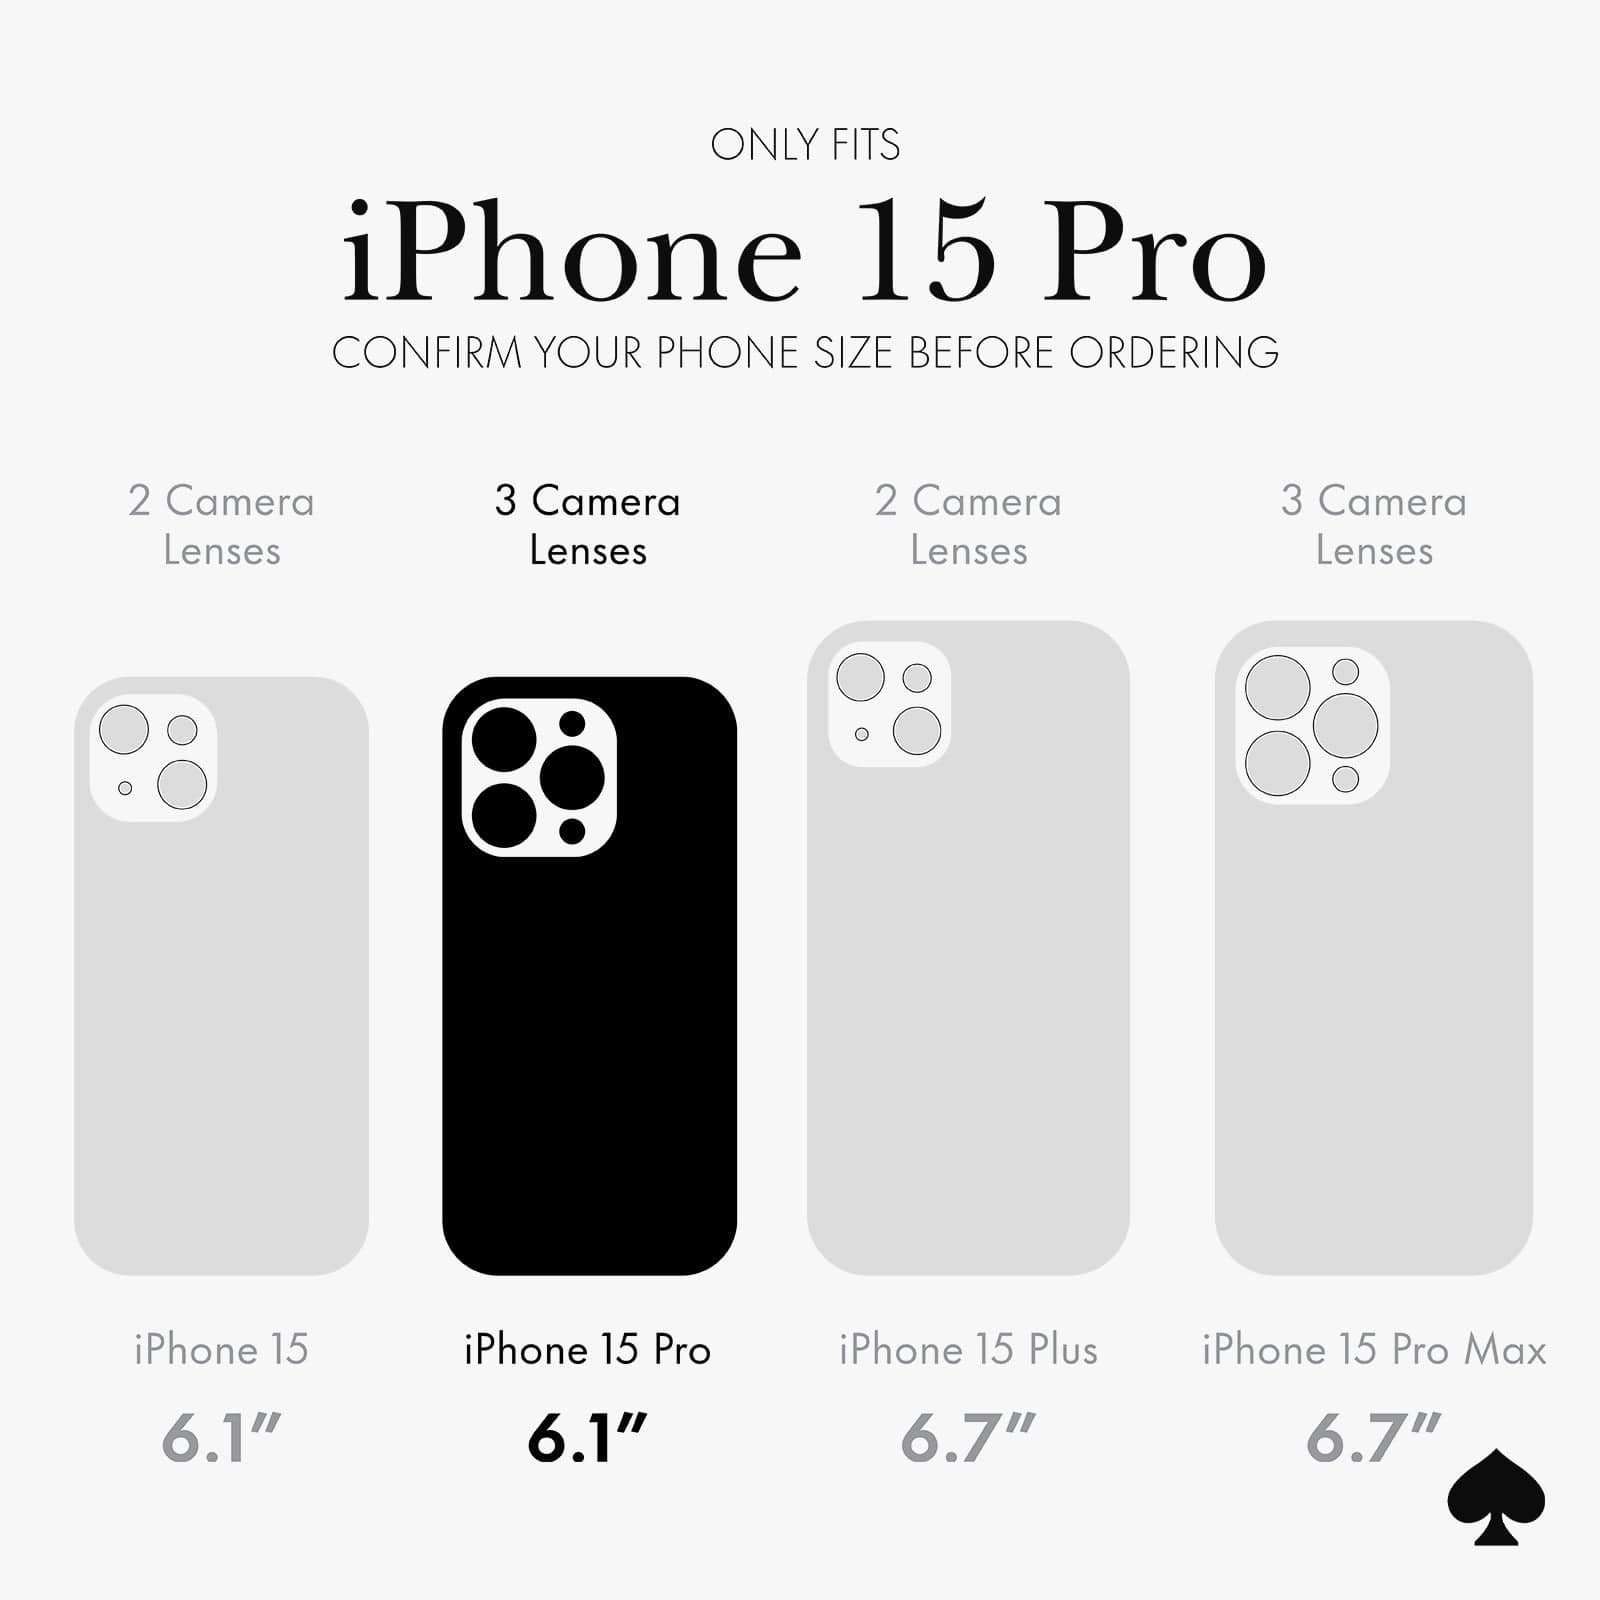 ONLY FITS IPHONE 15 PRO. CONFIRM YOUR SIZE BEFORE ORDERING